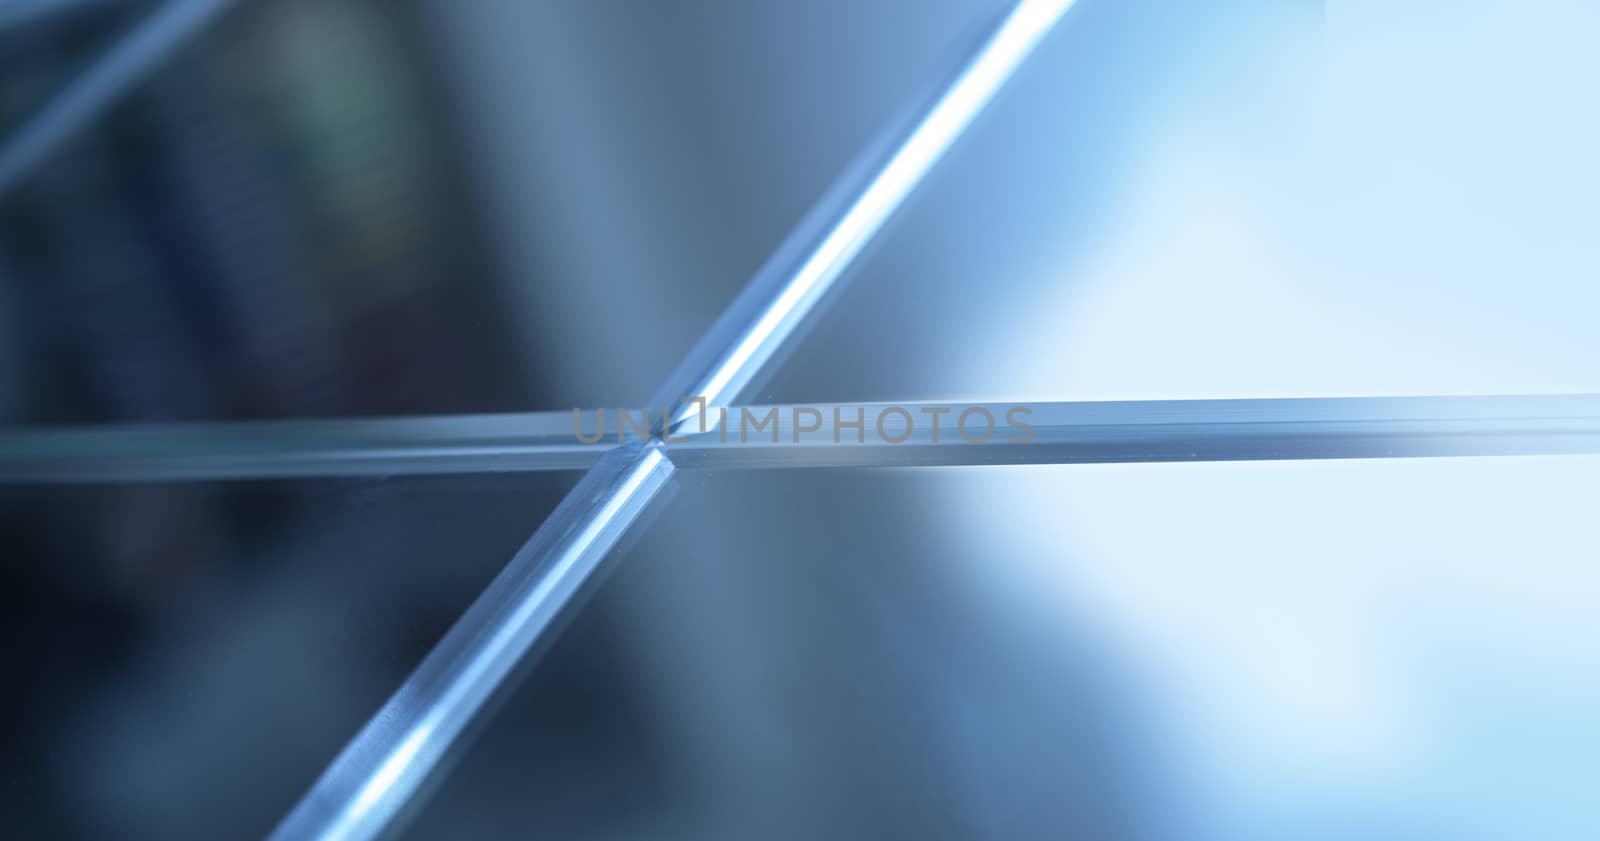 Glass, mirror reflection shapes and shadows. Close-up details.  Abstract geometric design with parallel and intersecting lines. Graphical representation of angle